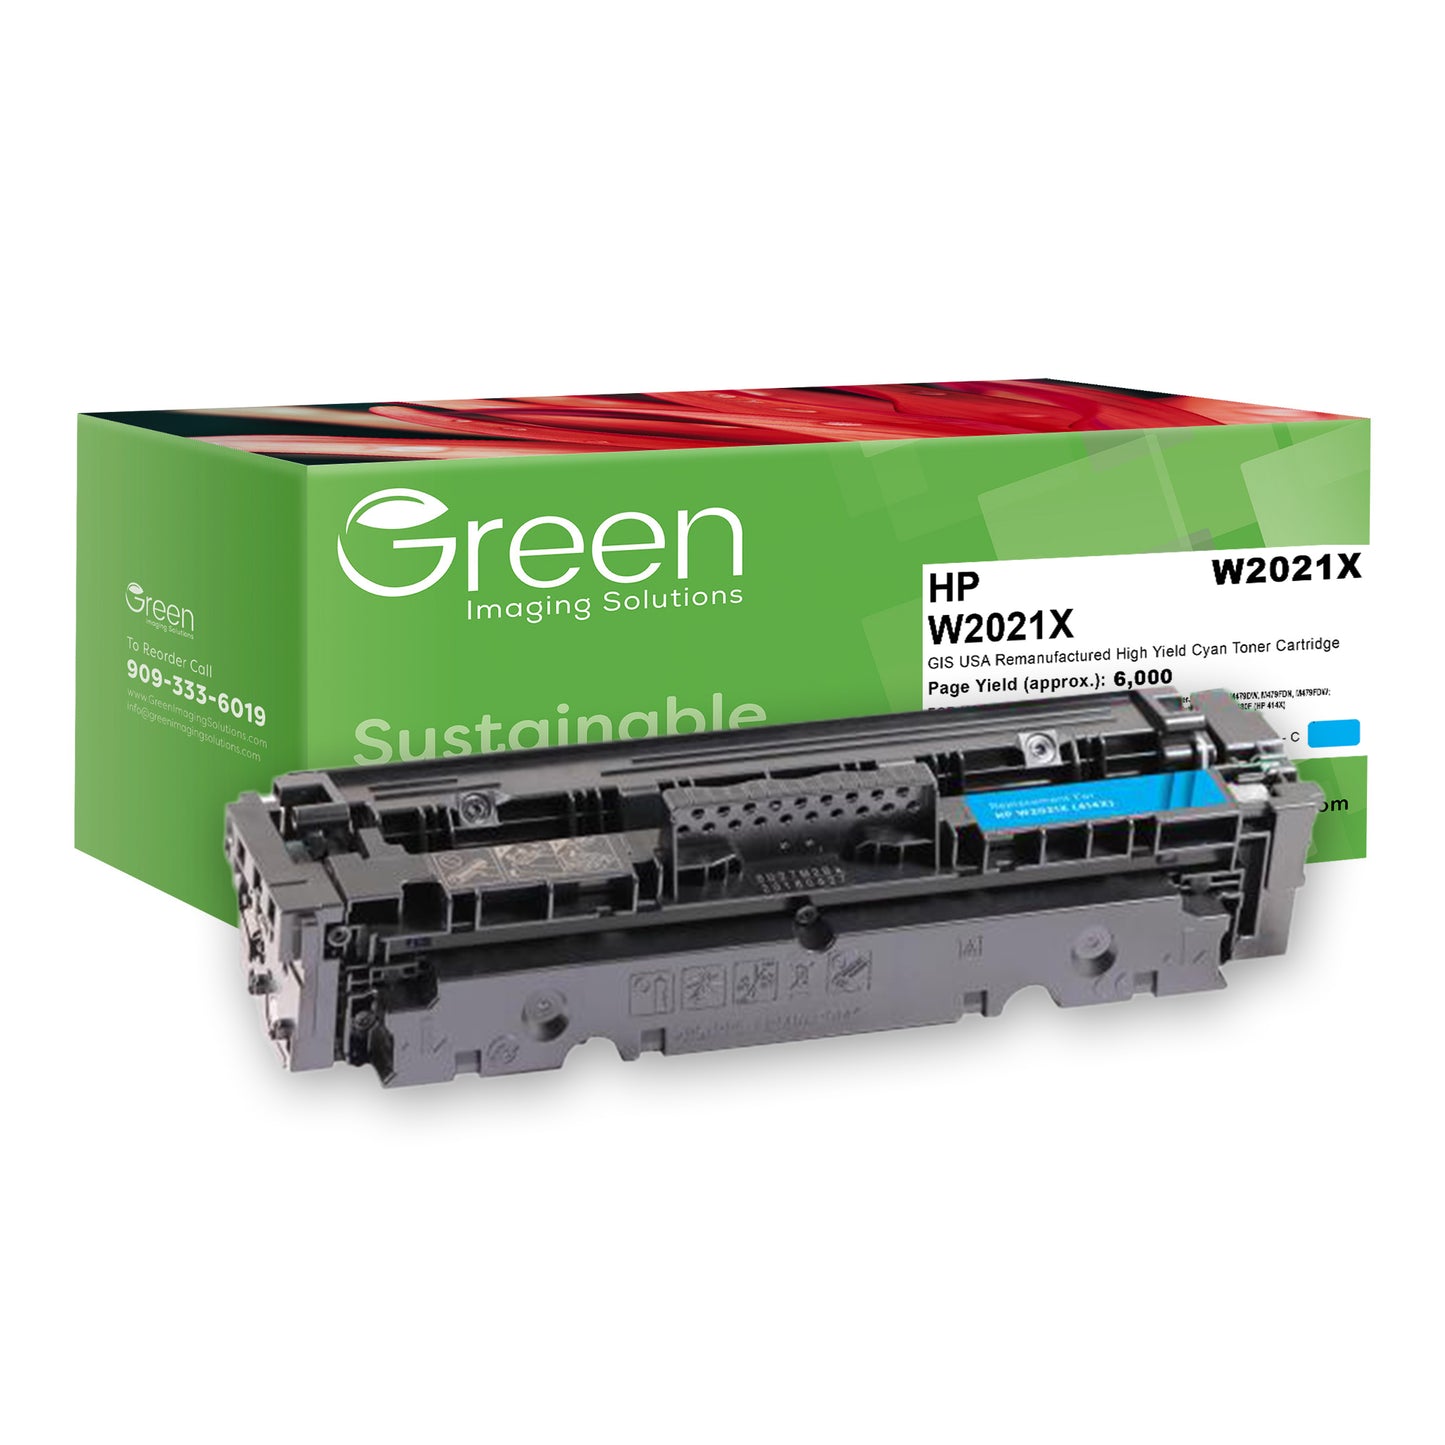 Green Imaging Solutions USA Remanufactured High Yield Cyan Toner Cartridge (New Chip) for HP 414X (W2021X)